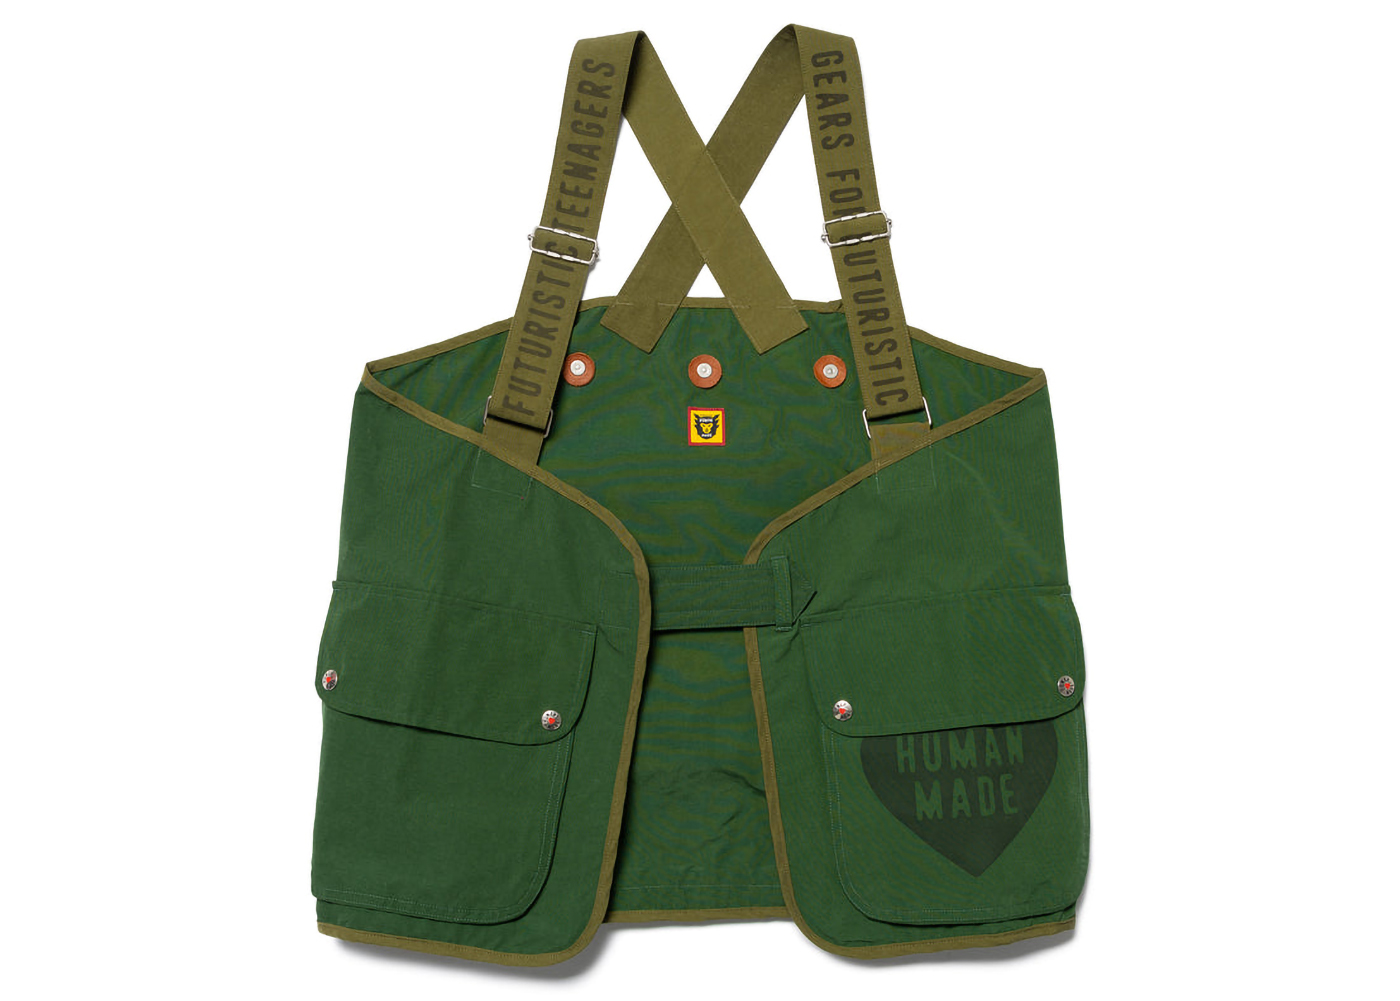 Human Made Hunting Vest Green - SS23 - US